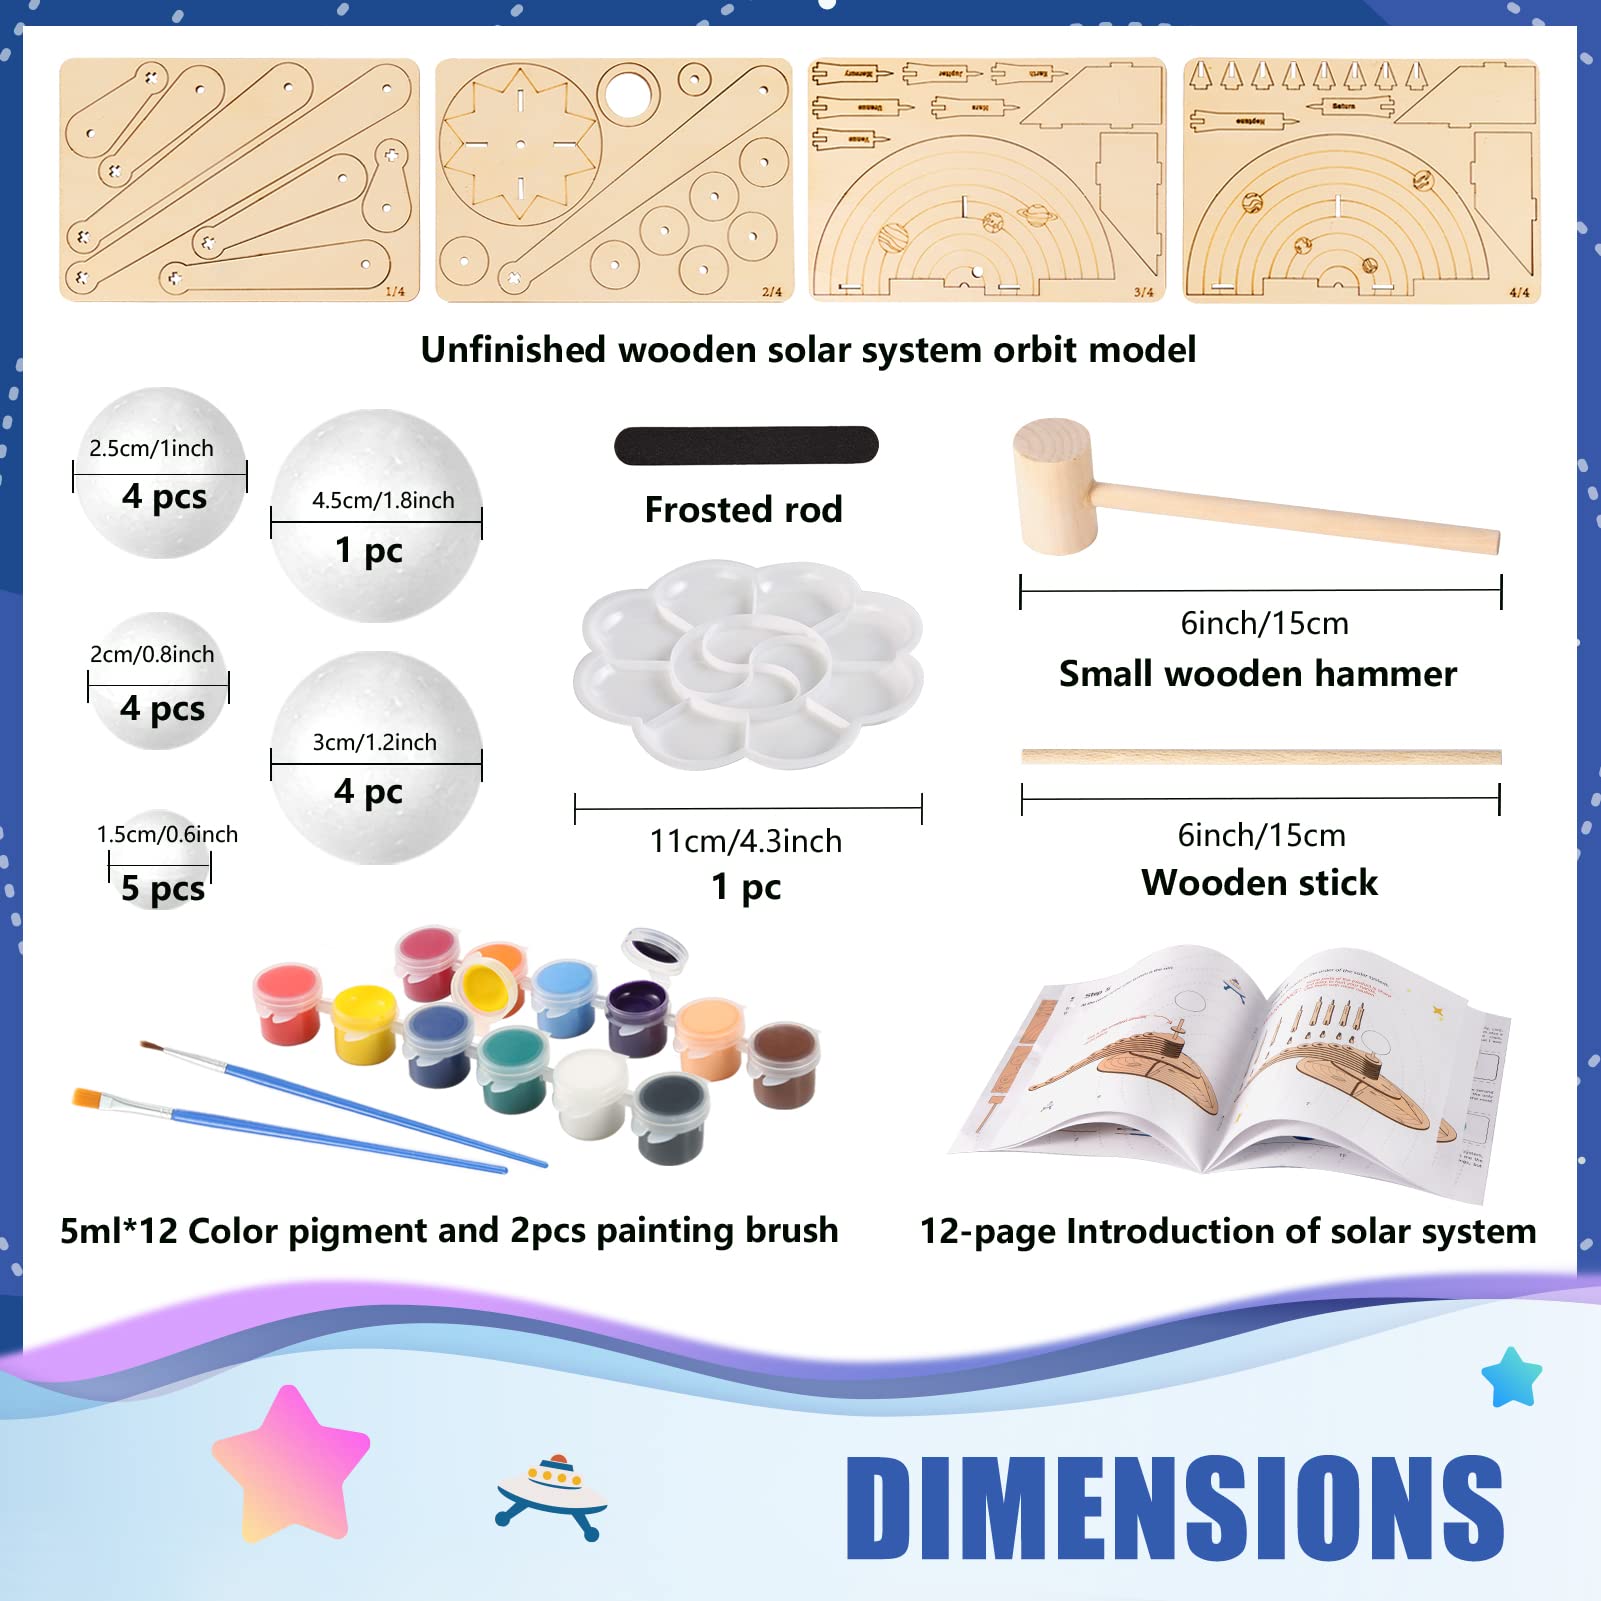 Pllieay Solar System Model Foam Ball Kit Includes 12 Color Pigments,  Palette, 18PCS Mixed Sized Polystyrene Spheres Balls, Toothpick Flag,  Painting